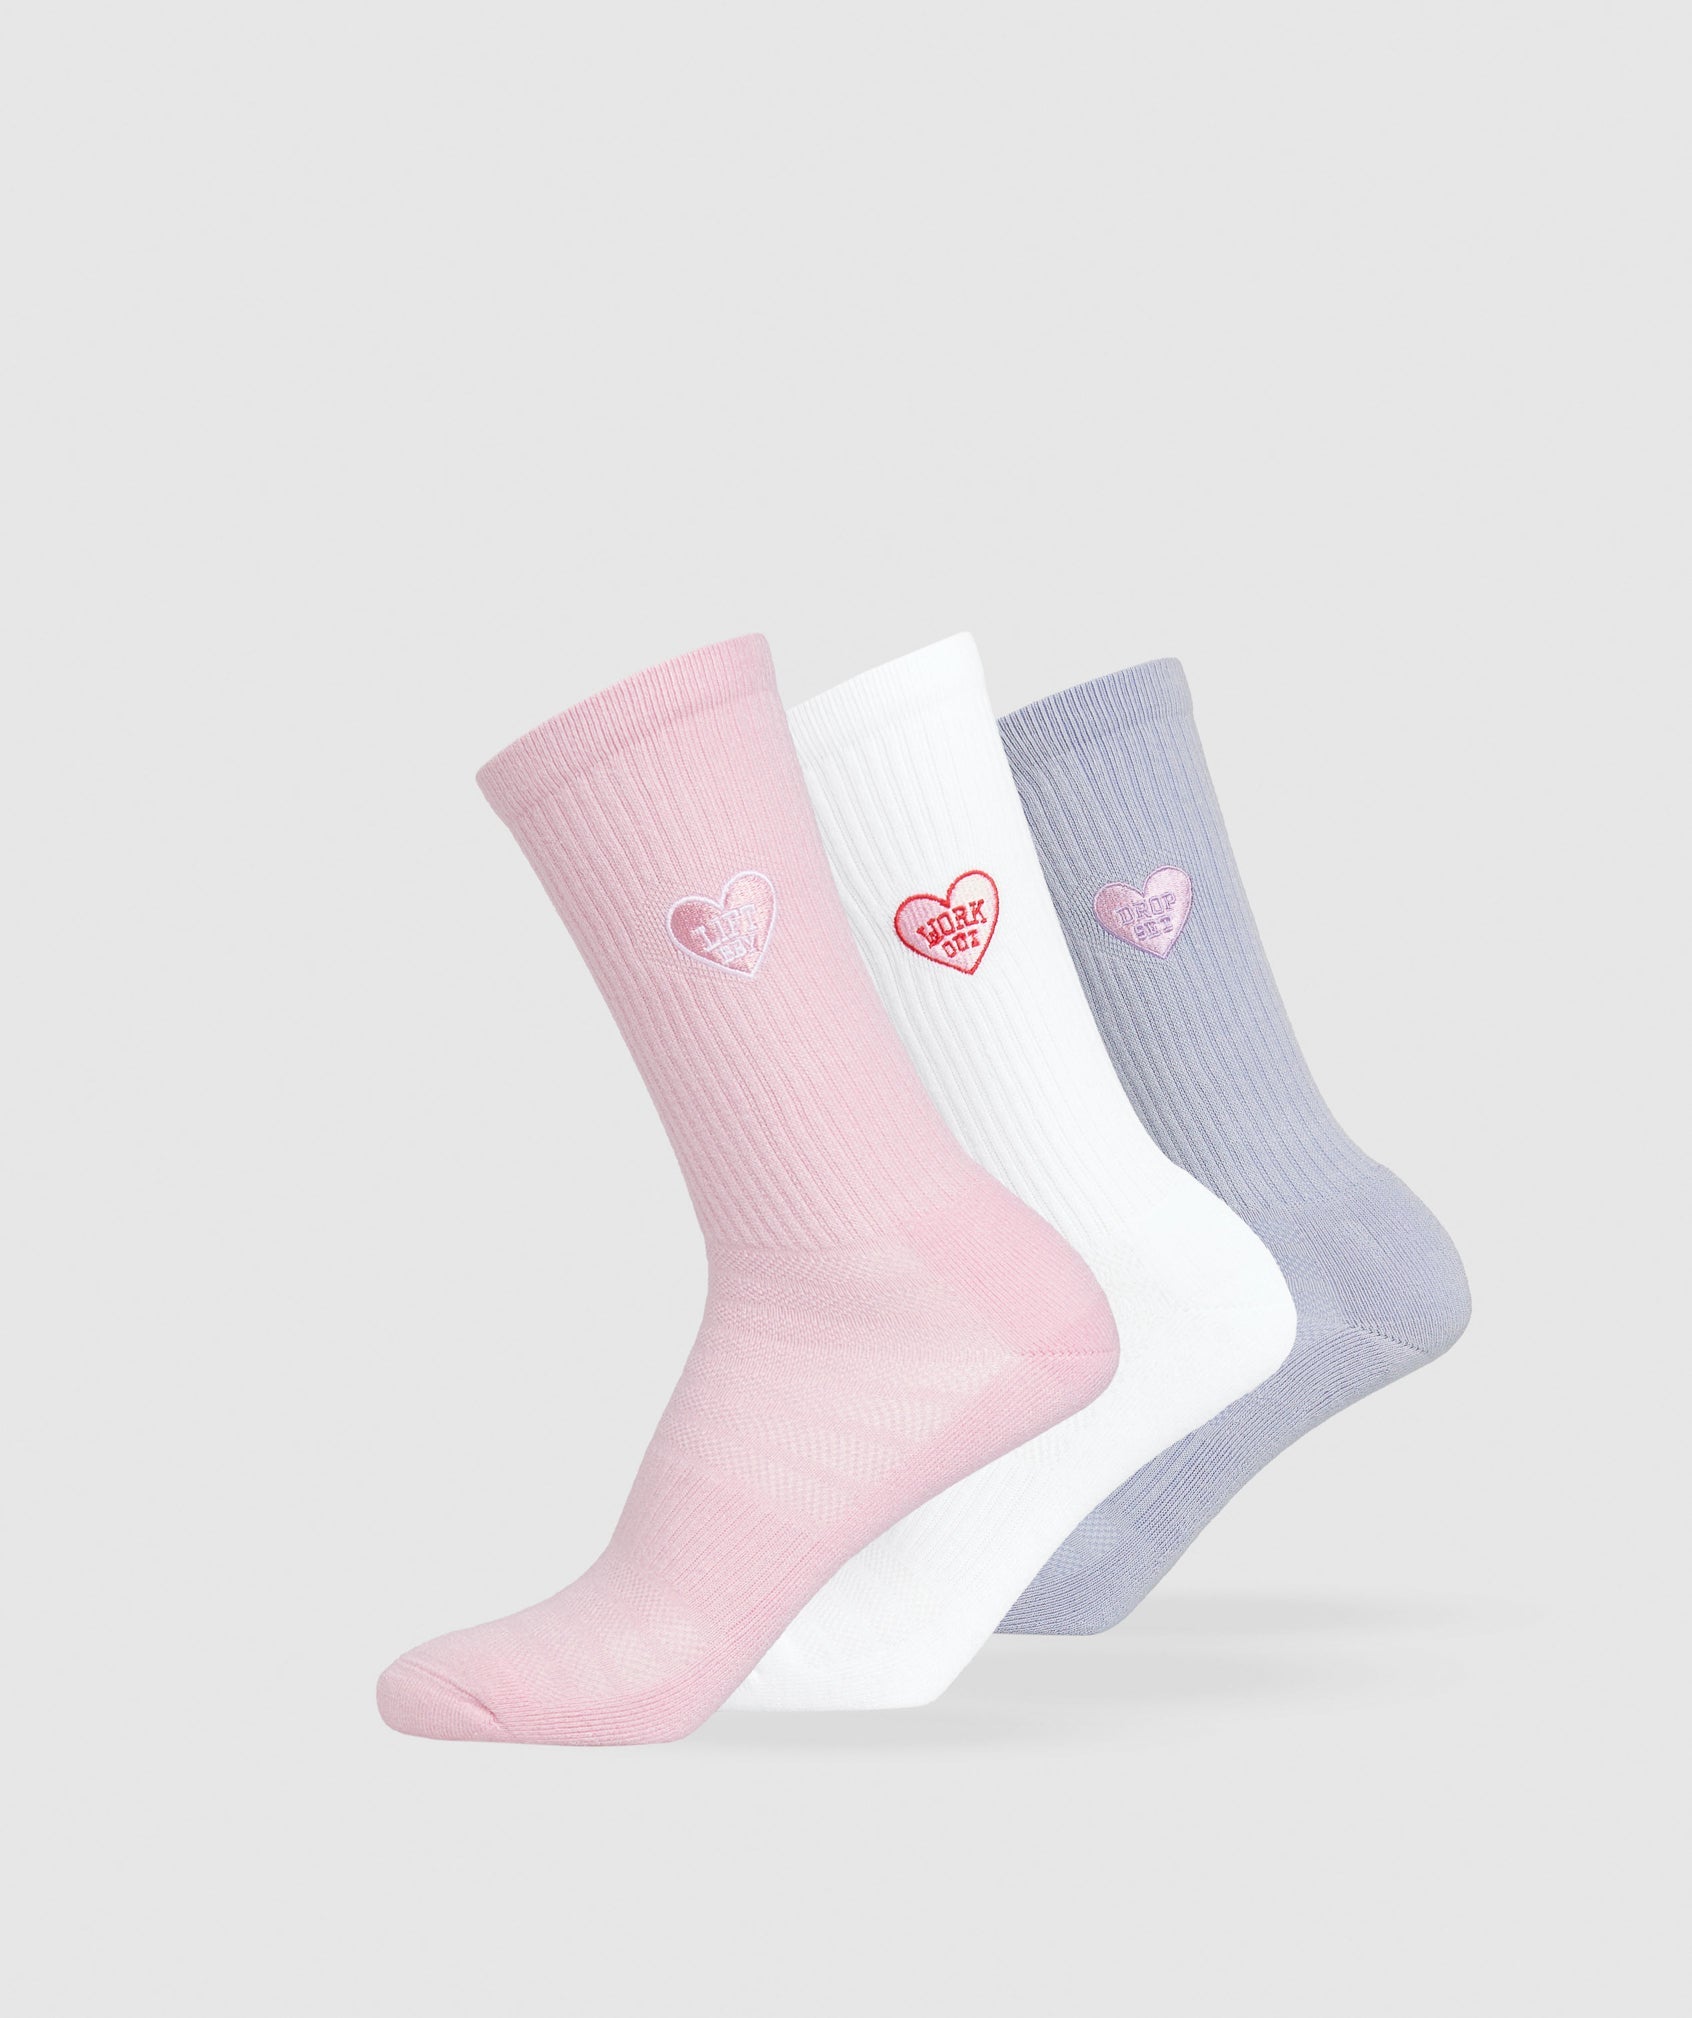 GFX 3pk Crew Socks in White/Silver Lilac/Dolly Pink - view 1